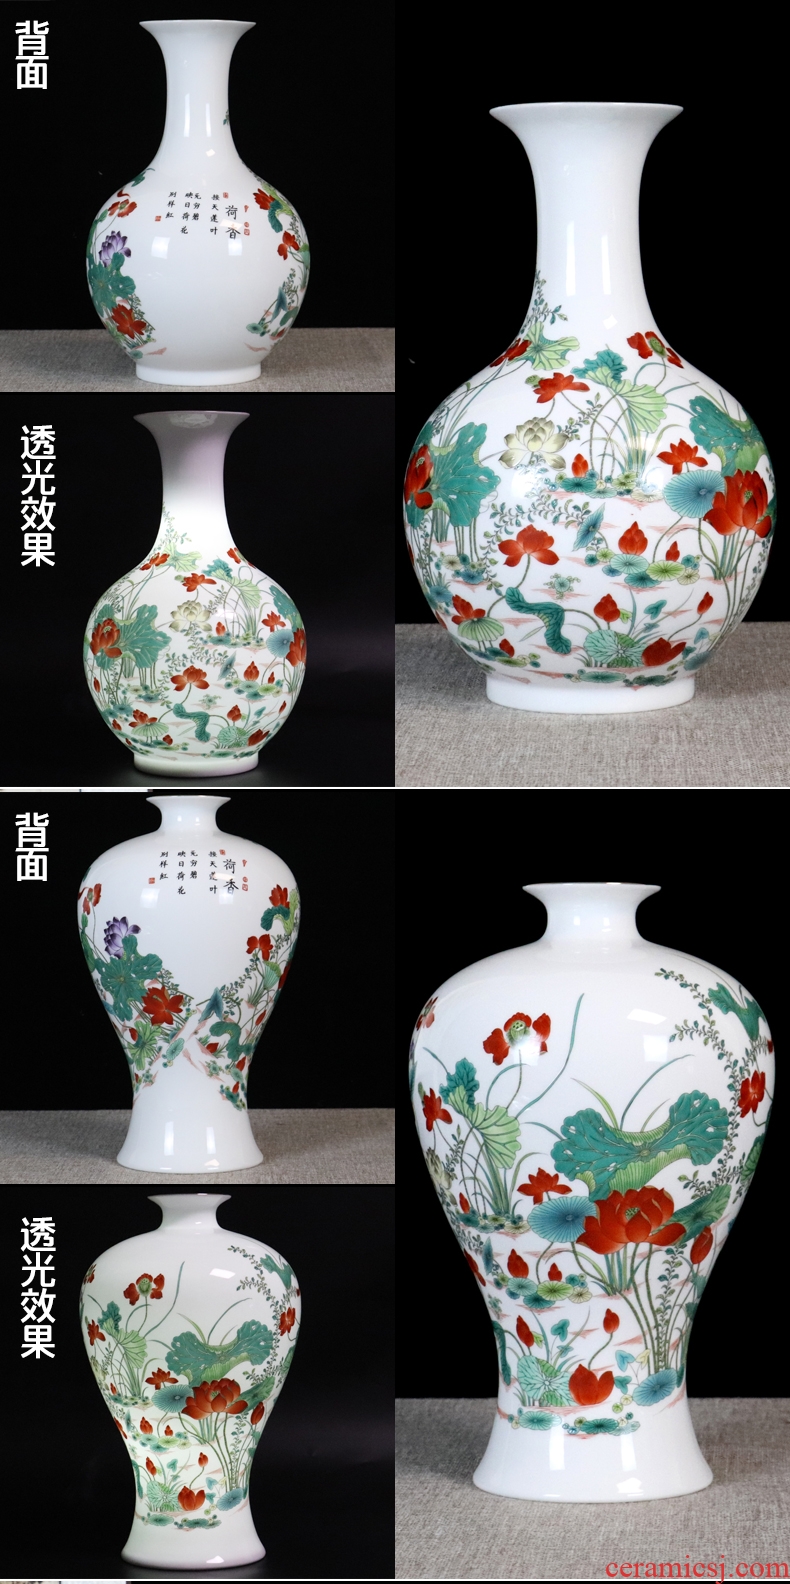 Fuels the jingdezhen ceramics vase furnishing articles dried flower arranging flowers sitting room manual of blue and white porcelain home decoration arts and crafts